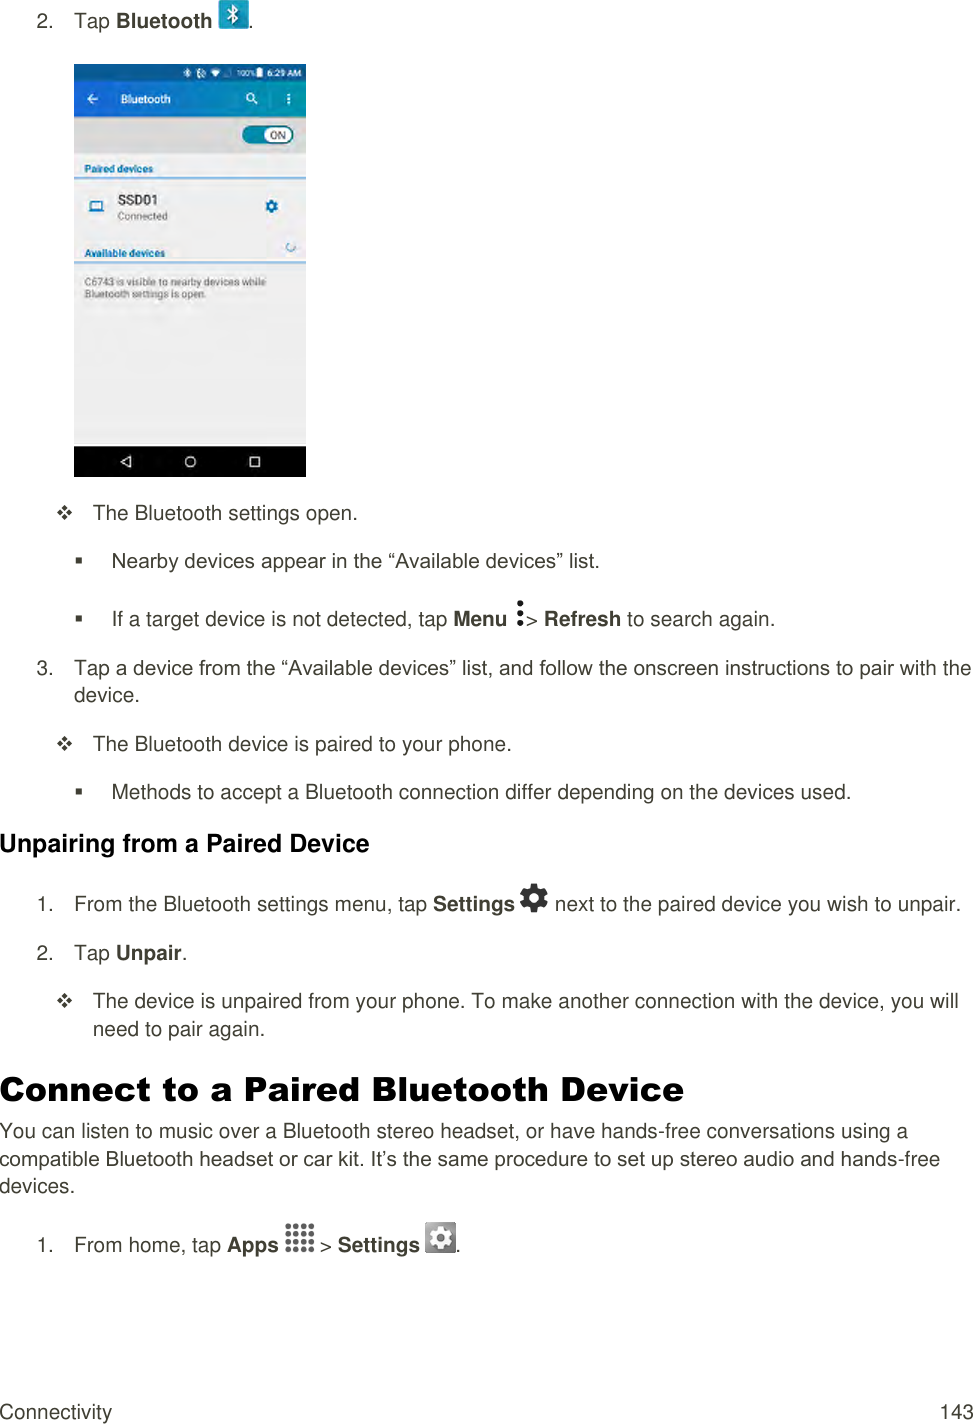 Connectivity  143 2.  Tap Bluetooth  .     The Bluetooth settings open.  Nearby devices appear in the “Available devices” list.   If a target device is not detected, tap Menu  &gt; Refresh to search again. 3.  Tap a device from the “Available devices” list, and follow the onscreen instructions to pair with the device.   The Bluetooth device is paired to your phone.   Methods to accept a Bluetooth connection differ depending on the devices used. Unpairing from a Paired Device 1.  From the Bluetooth settings menu, tap Settings   next to the paired device you wish to unpair. 2.  Tap Unpair.   The device is unpaired from your phone. To make another connection with the device, you will need to pair again. Connect to a Paired Bluetooth Device You can listen to music over a Bluetooth stereo headset, or have hands-free conversations using a compatible Bluetooth headset or car kit. It’s the same procedure to set up stereo audio and hands-free devices. 1.  From home, tap Apps   &gt; Settings  .  